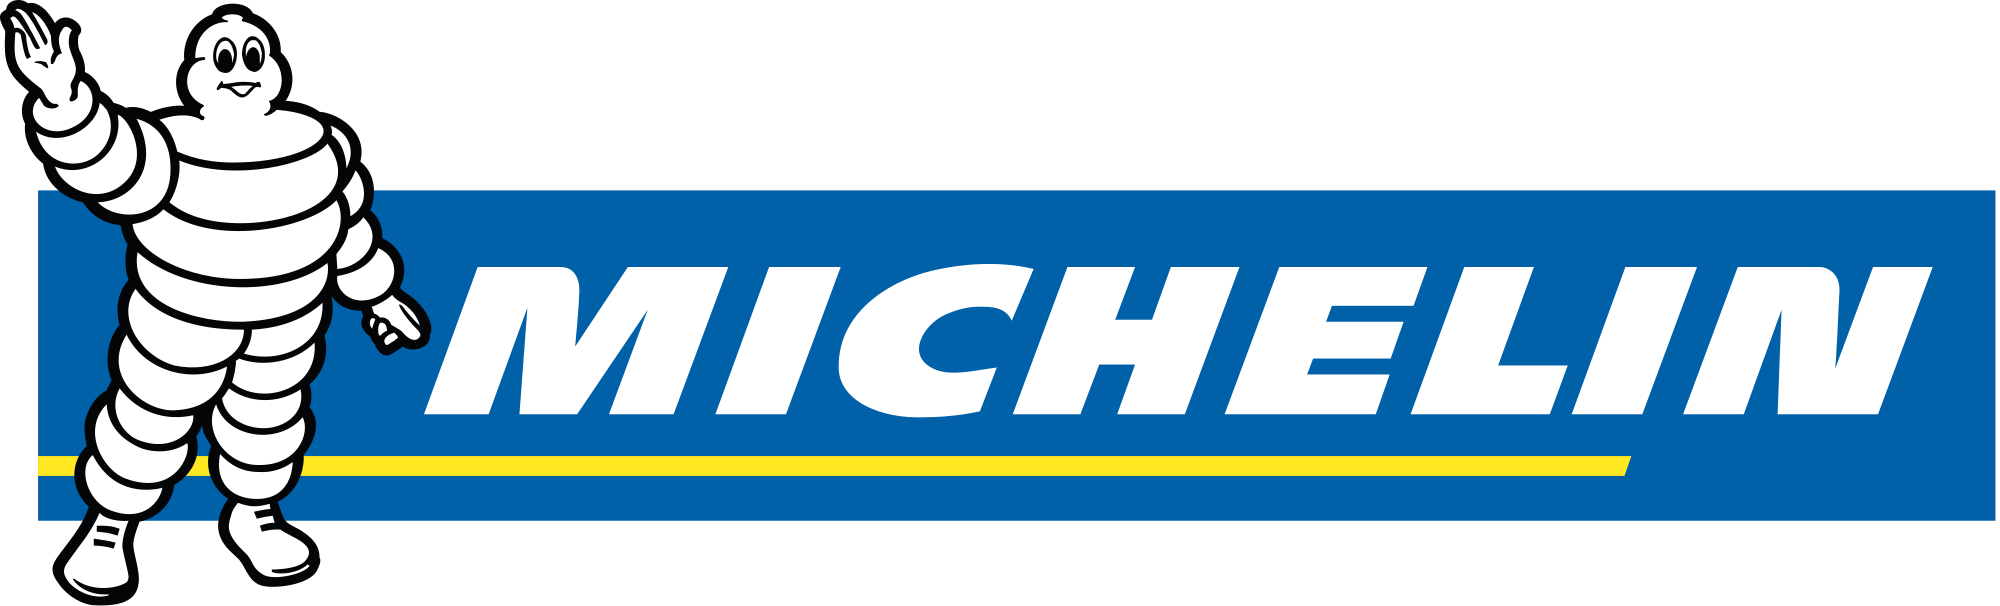 Michelin.png - Michelin, Transparent background PNG HD thumbnail